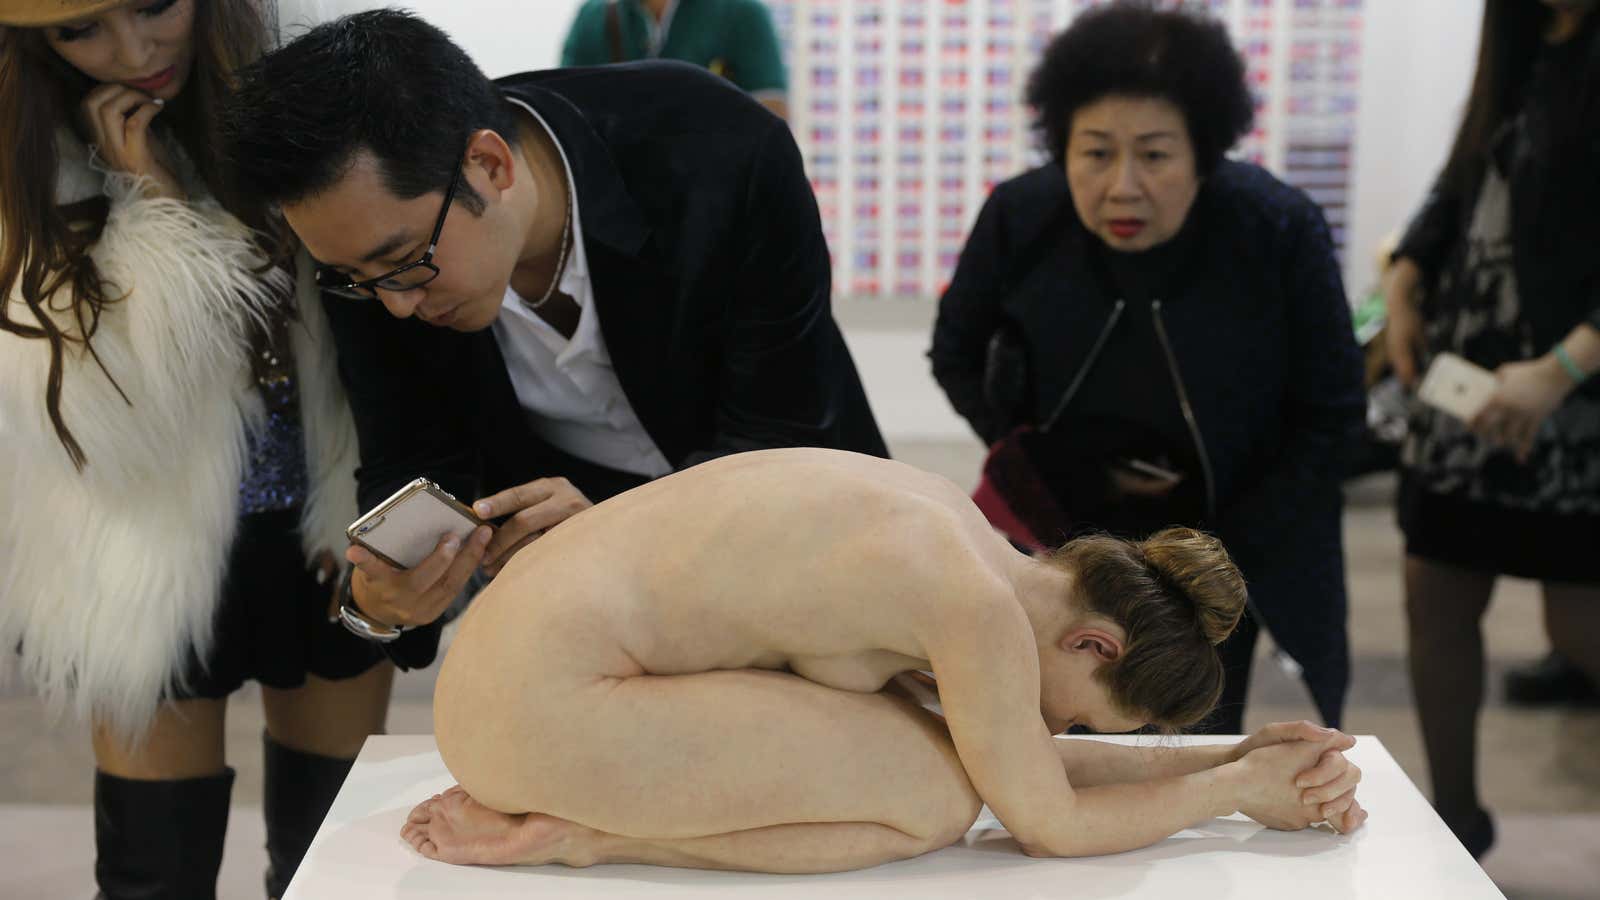 Visitors photograph “Untitled (Kneeling Woman),” a sculpture made by Sam Jinks with silicone and human hair, at Hong Kong’s Art Basel.